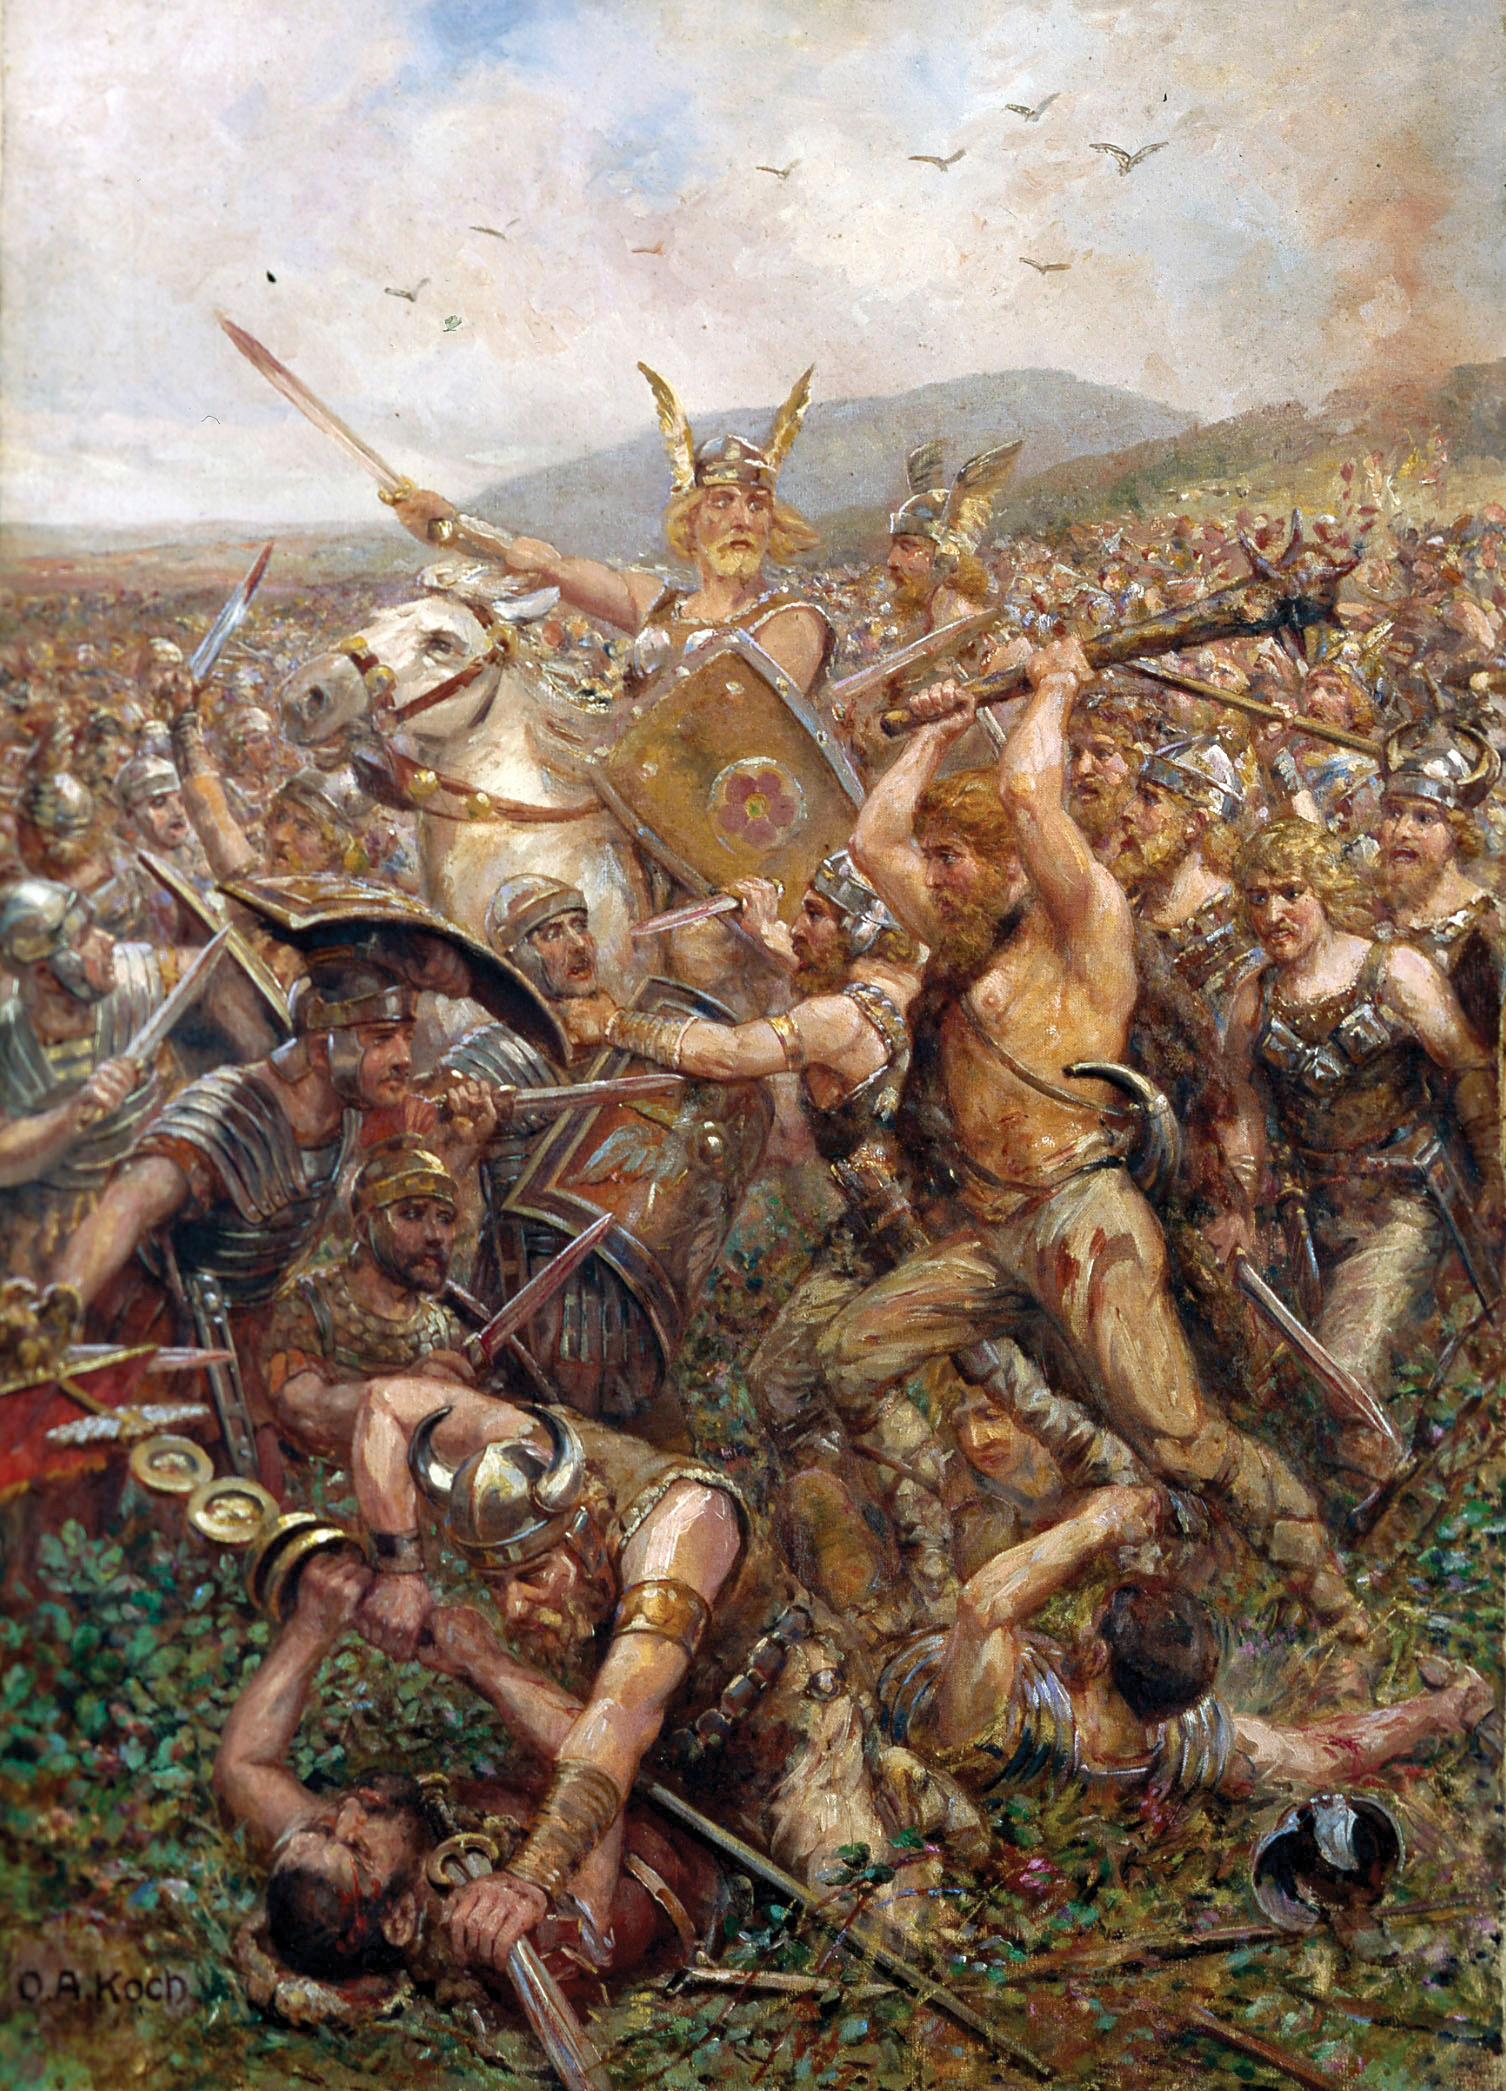 German tribesmen overrun a Roman unit. Unlike in Gaul, the lack of large urban centers and good roads in Germany made it difficult for the Romans to subjugate the scattered militaristic population.